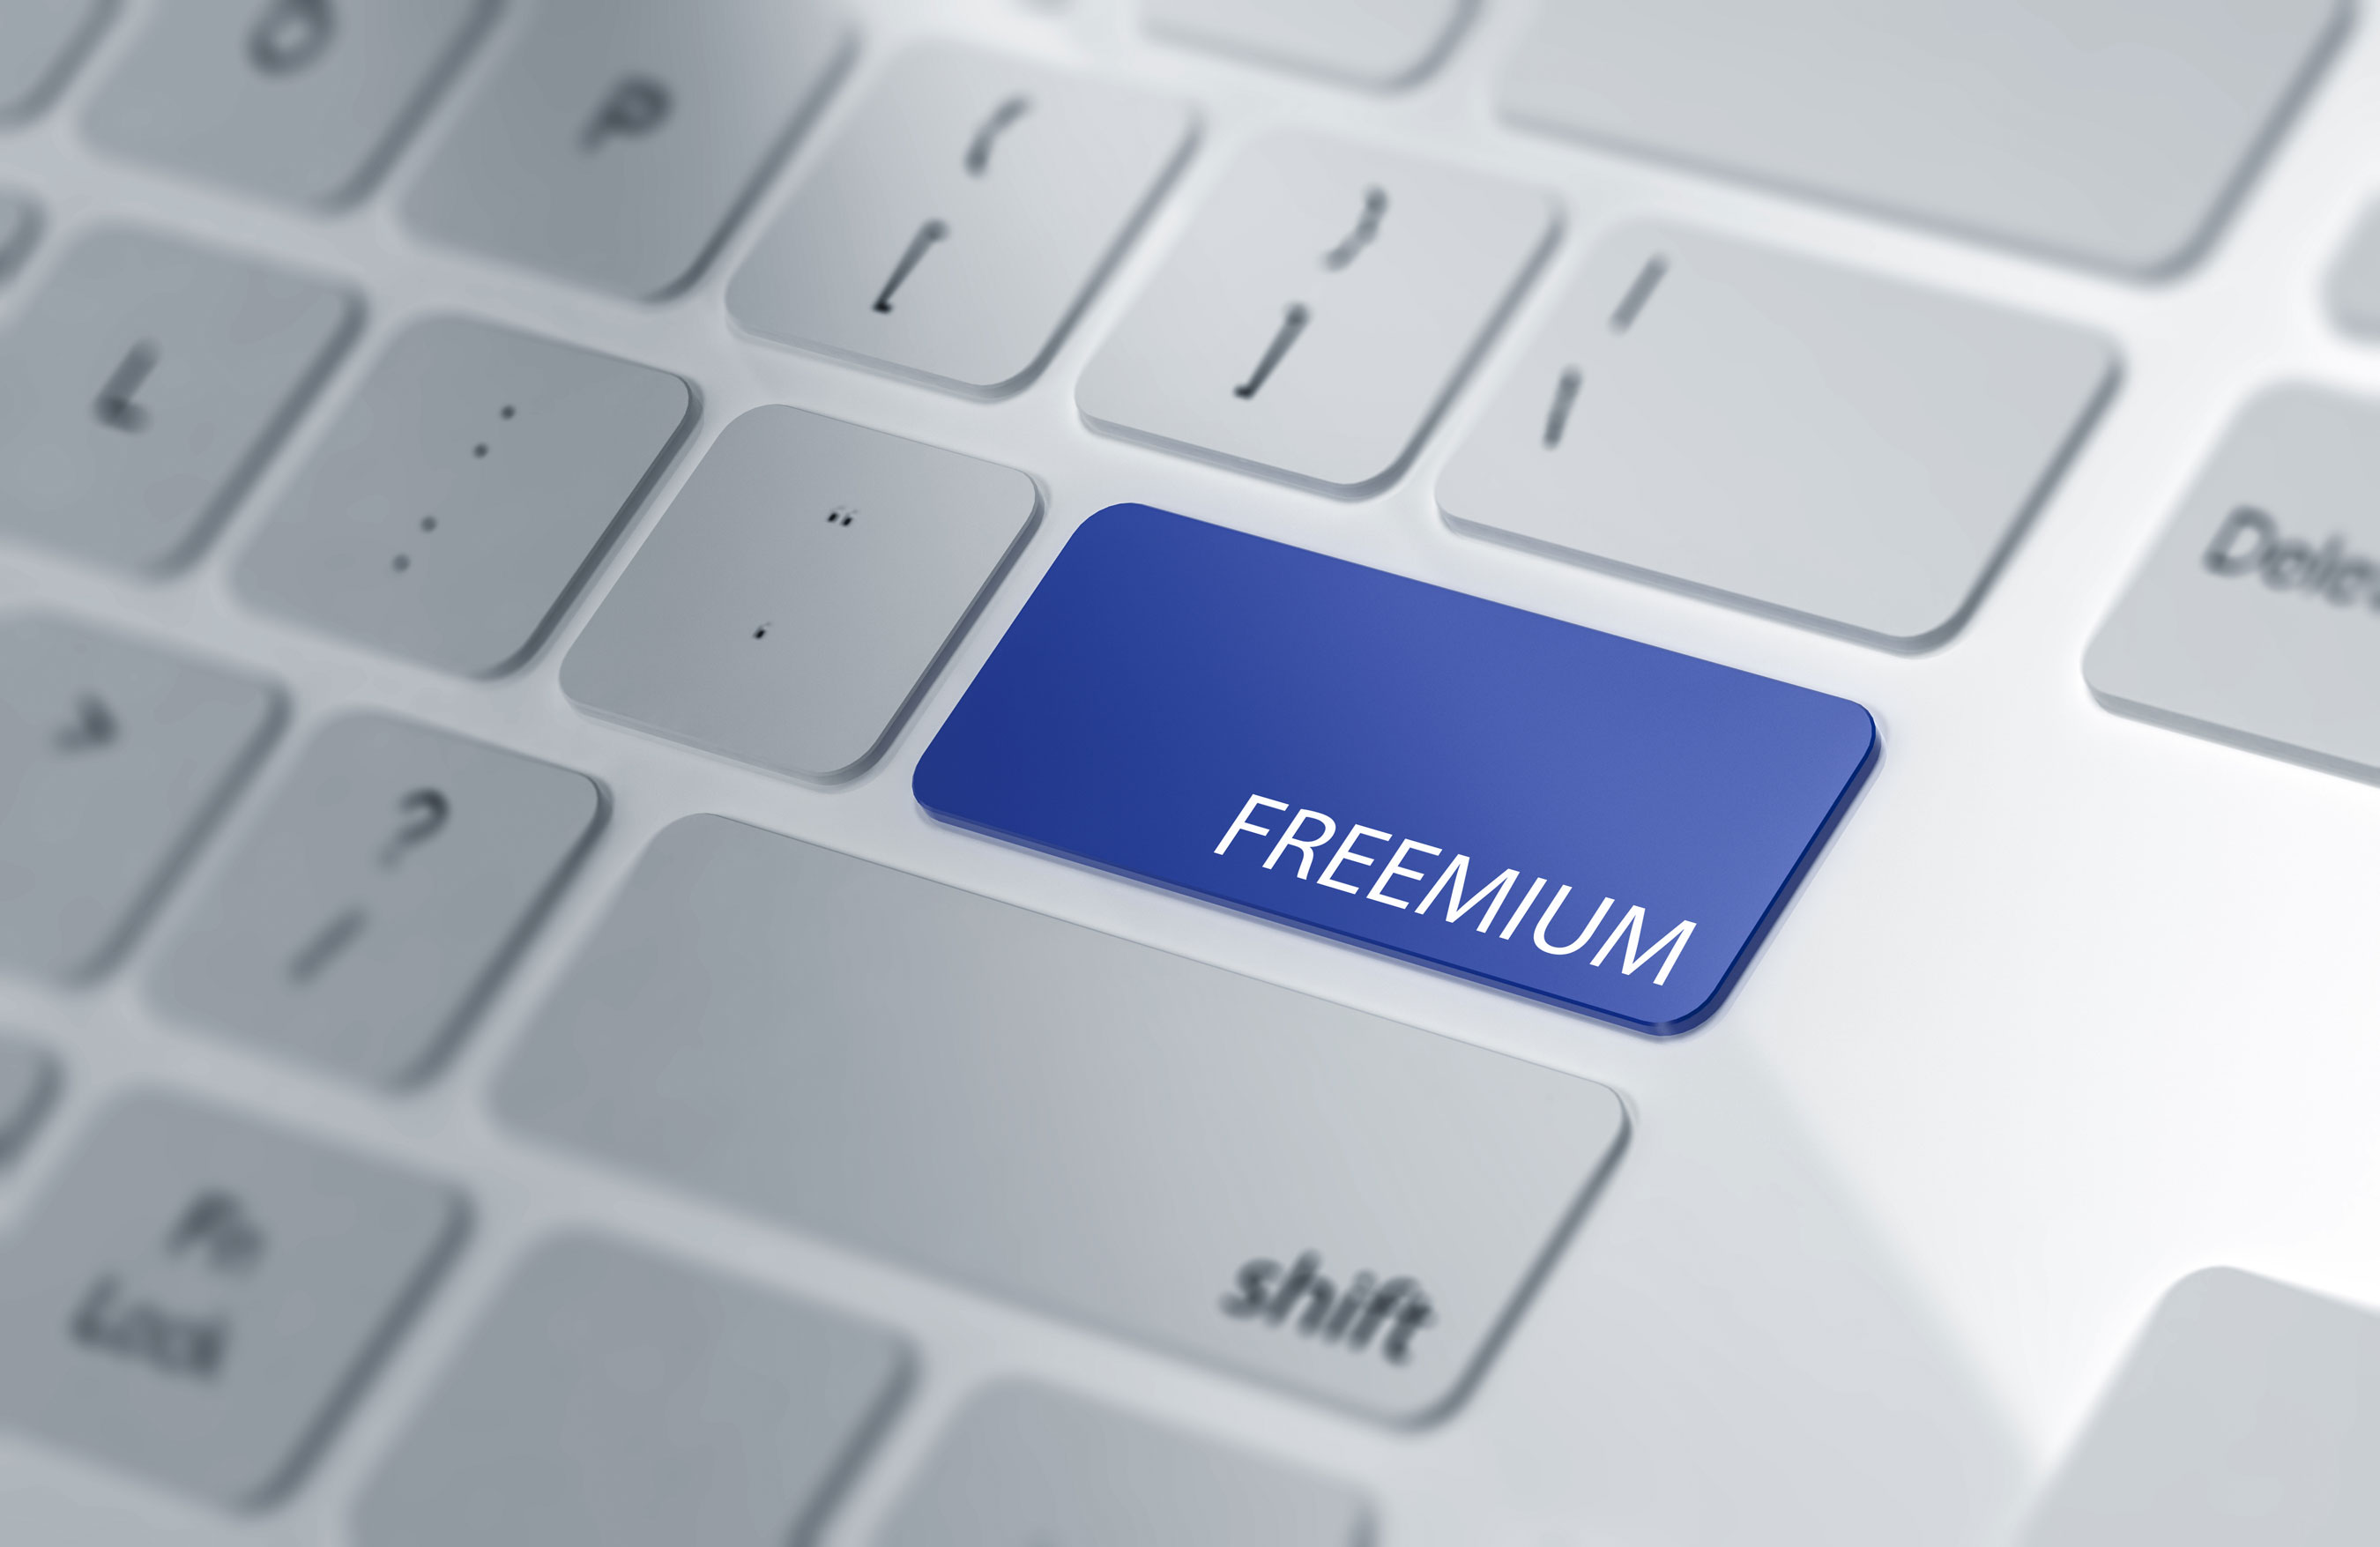 Understanding freemium models with the free cookie clicker — a UX